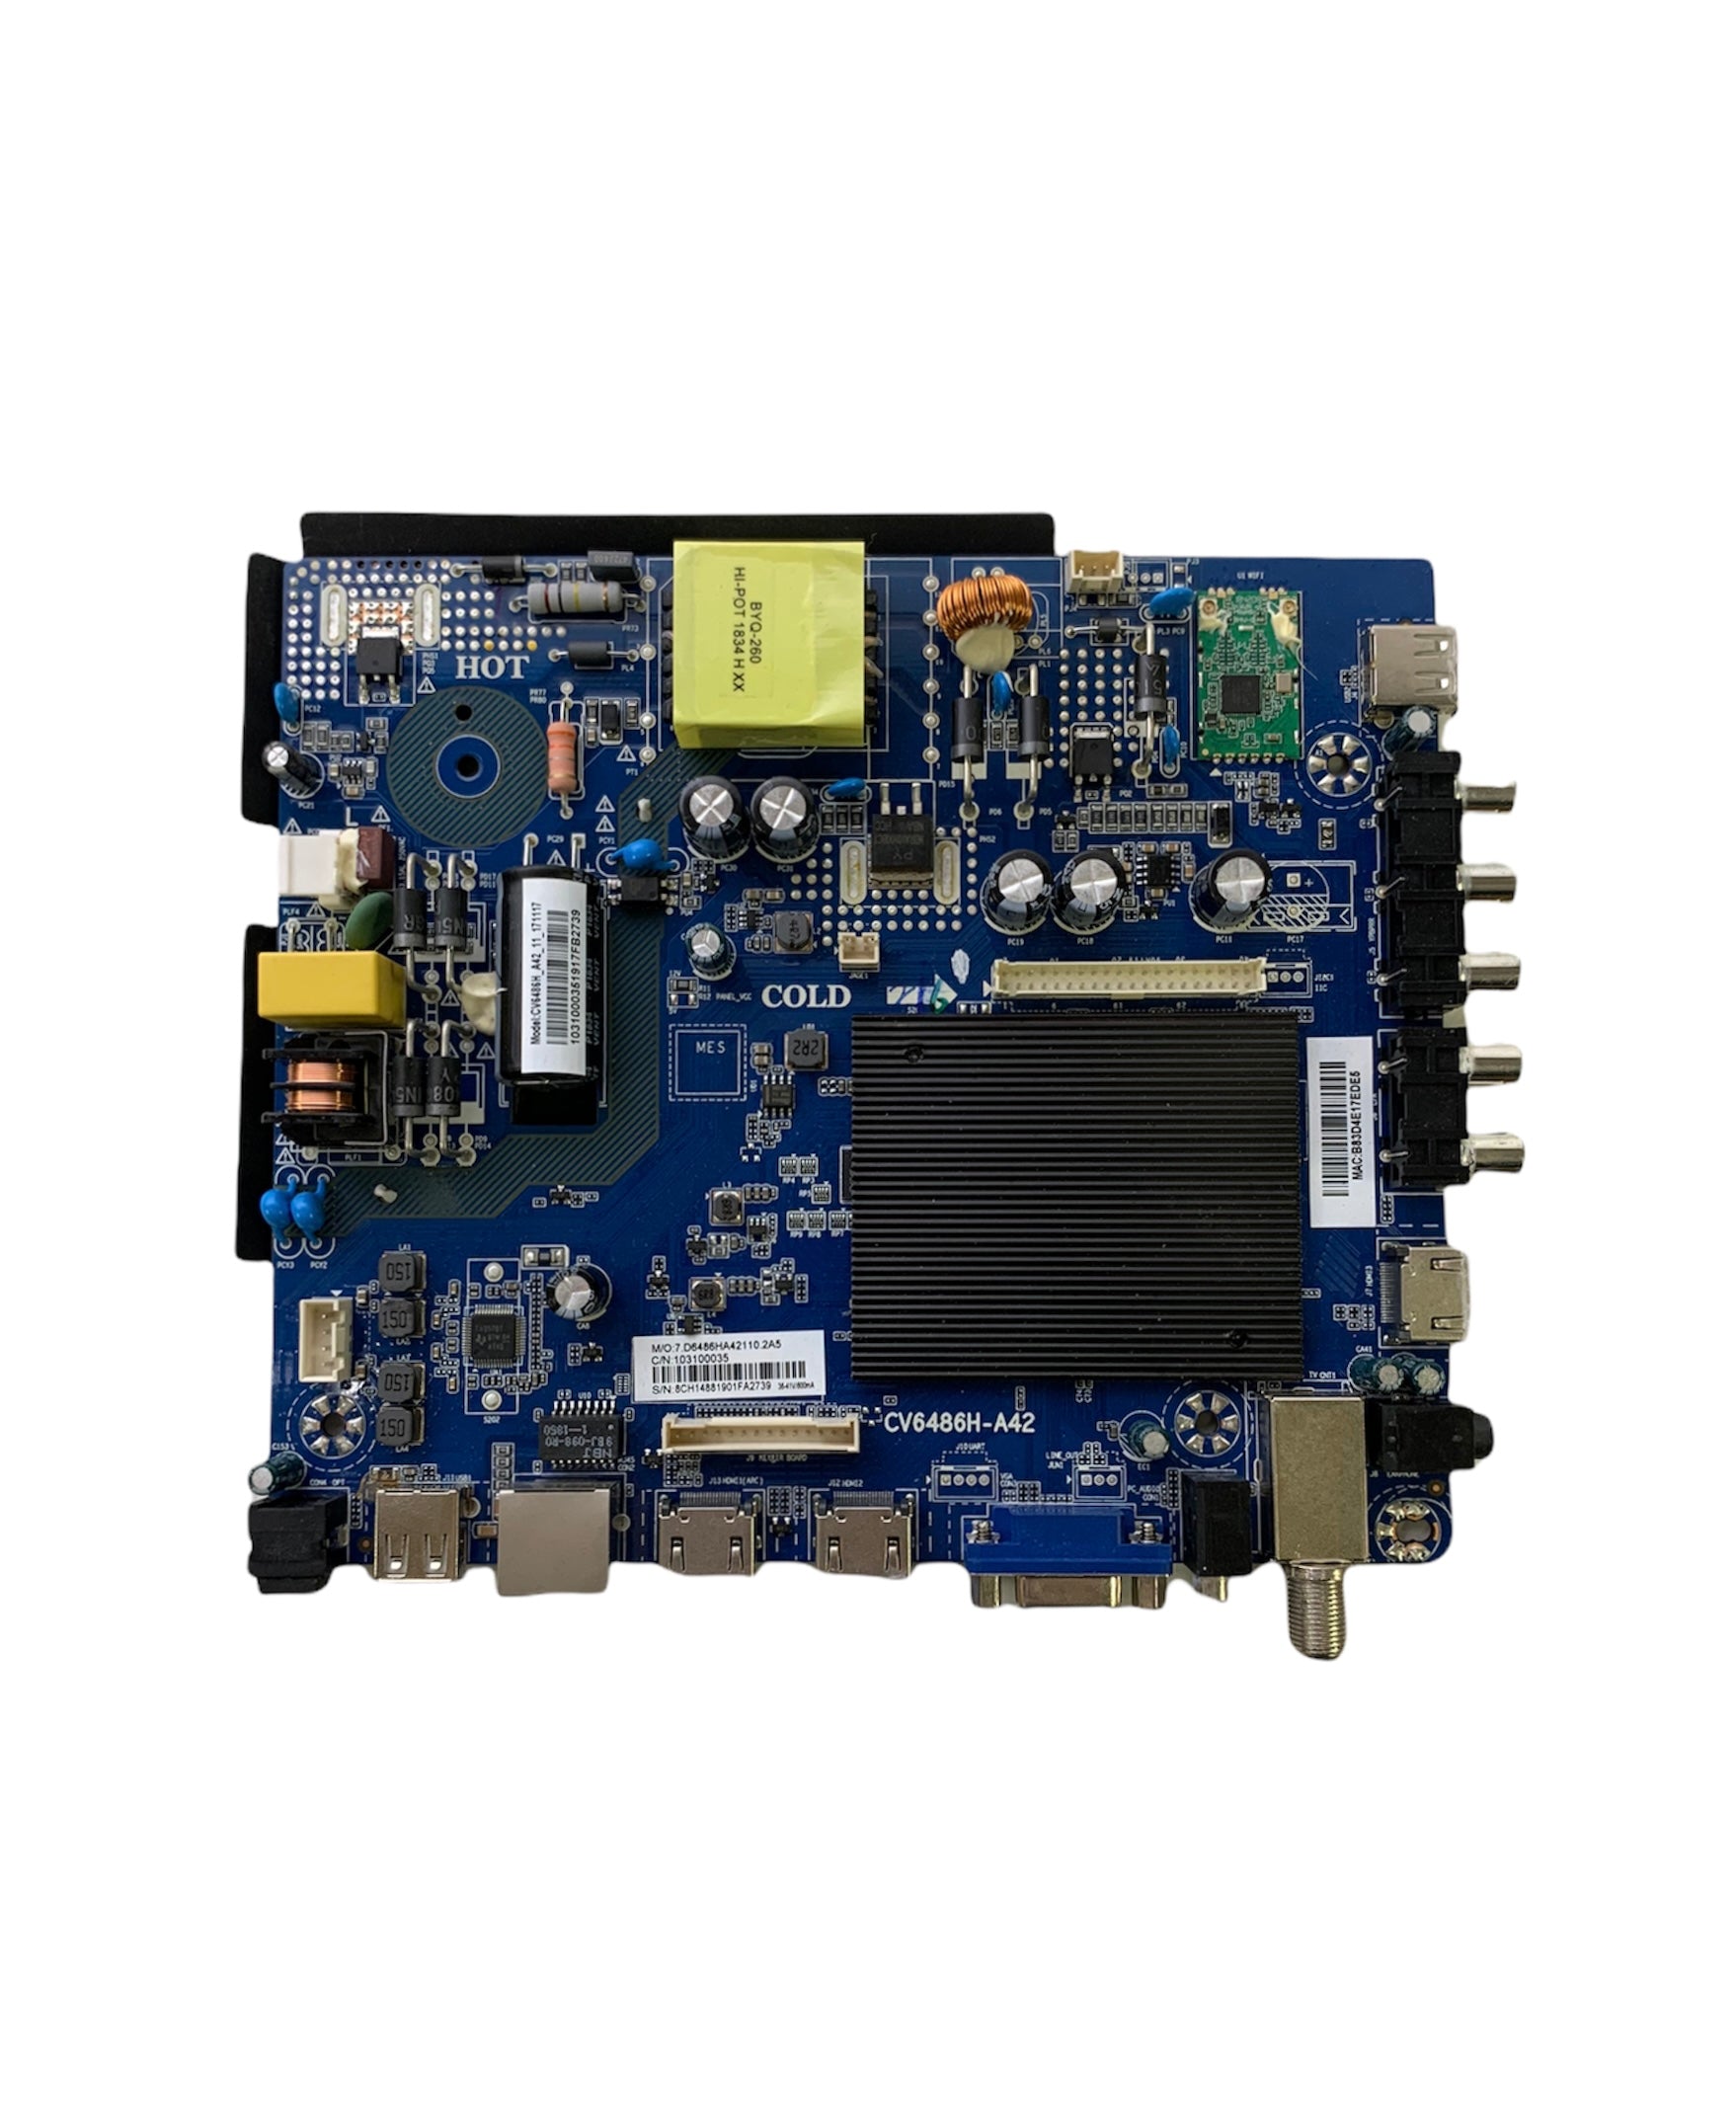 Element E19002-SY Main Board / Power Supply for ELST3216H (A9G2M Serial)